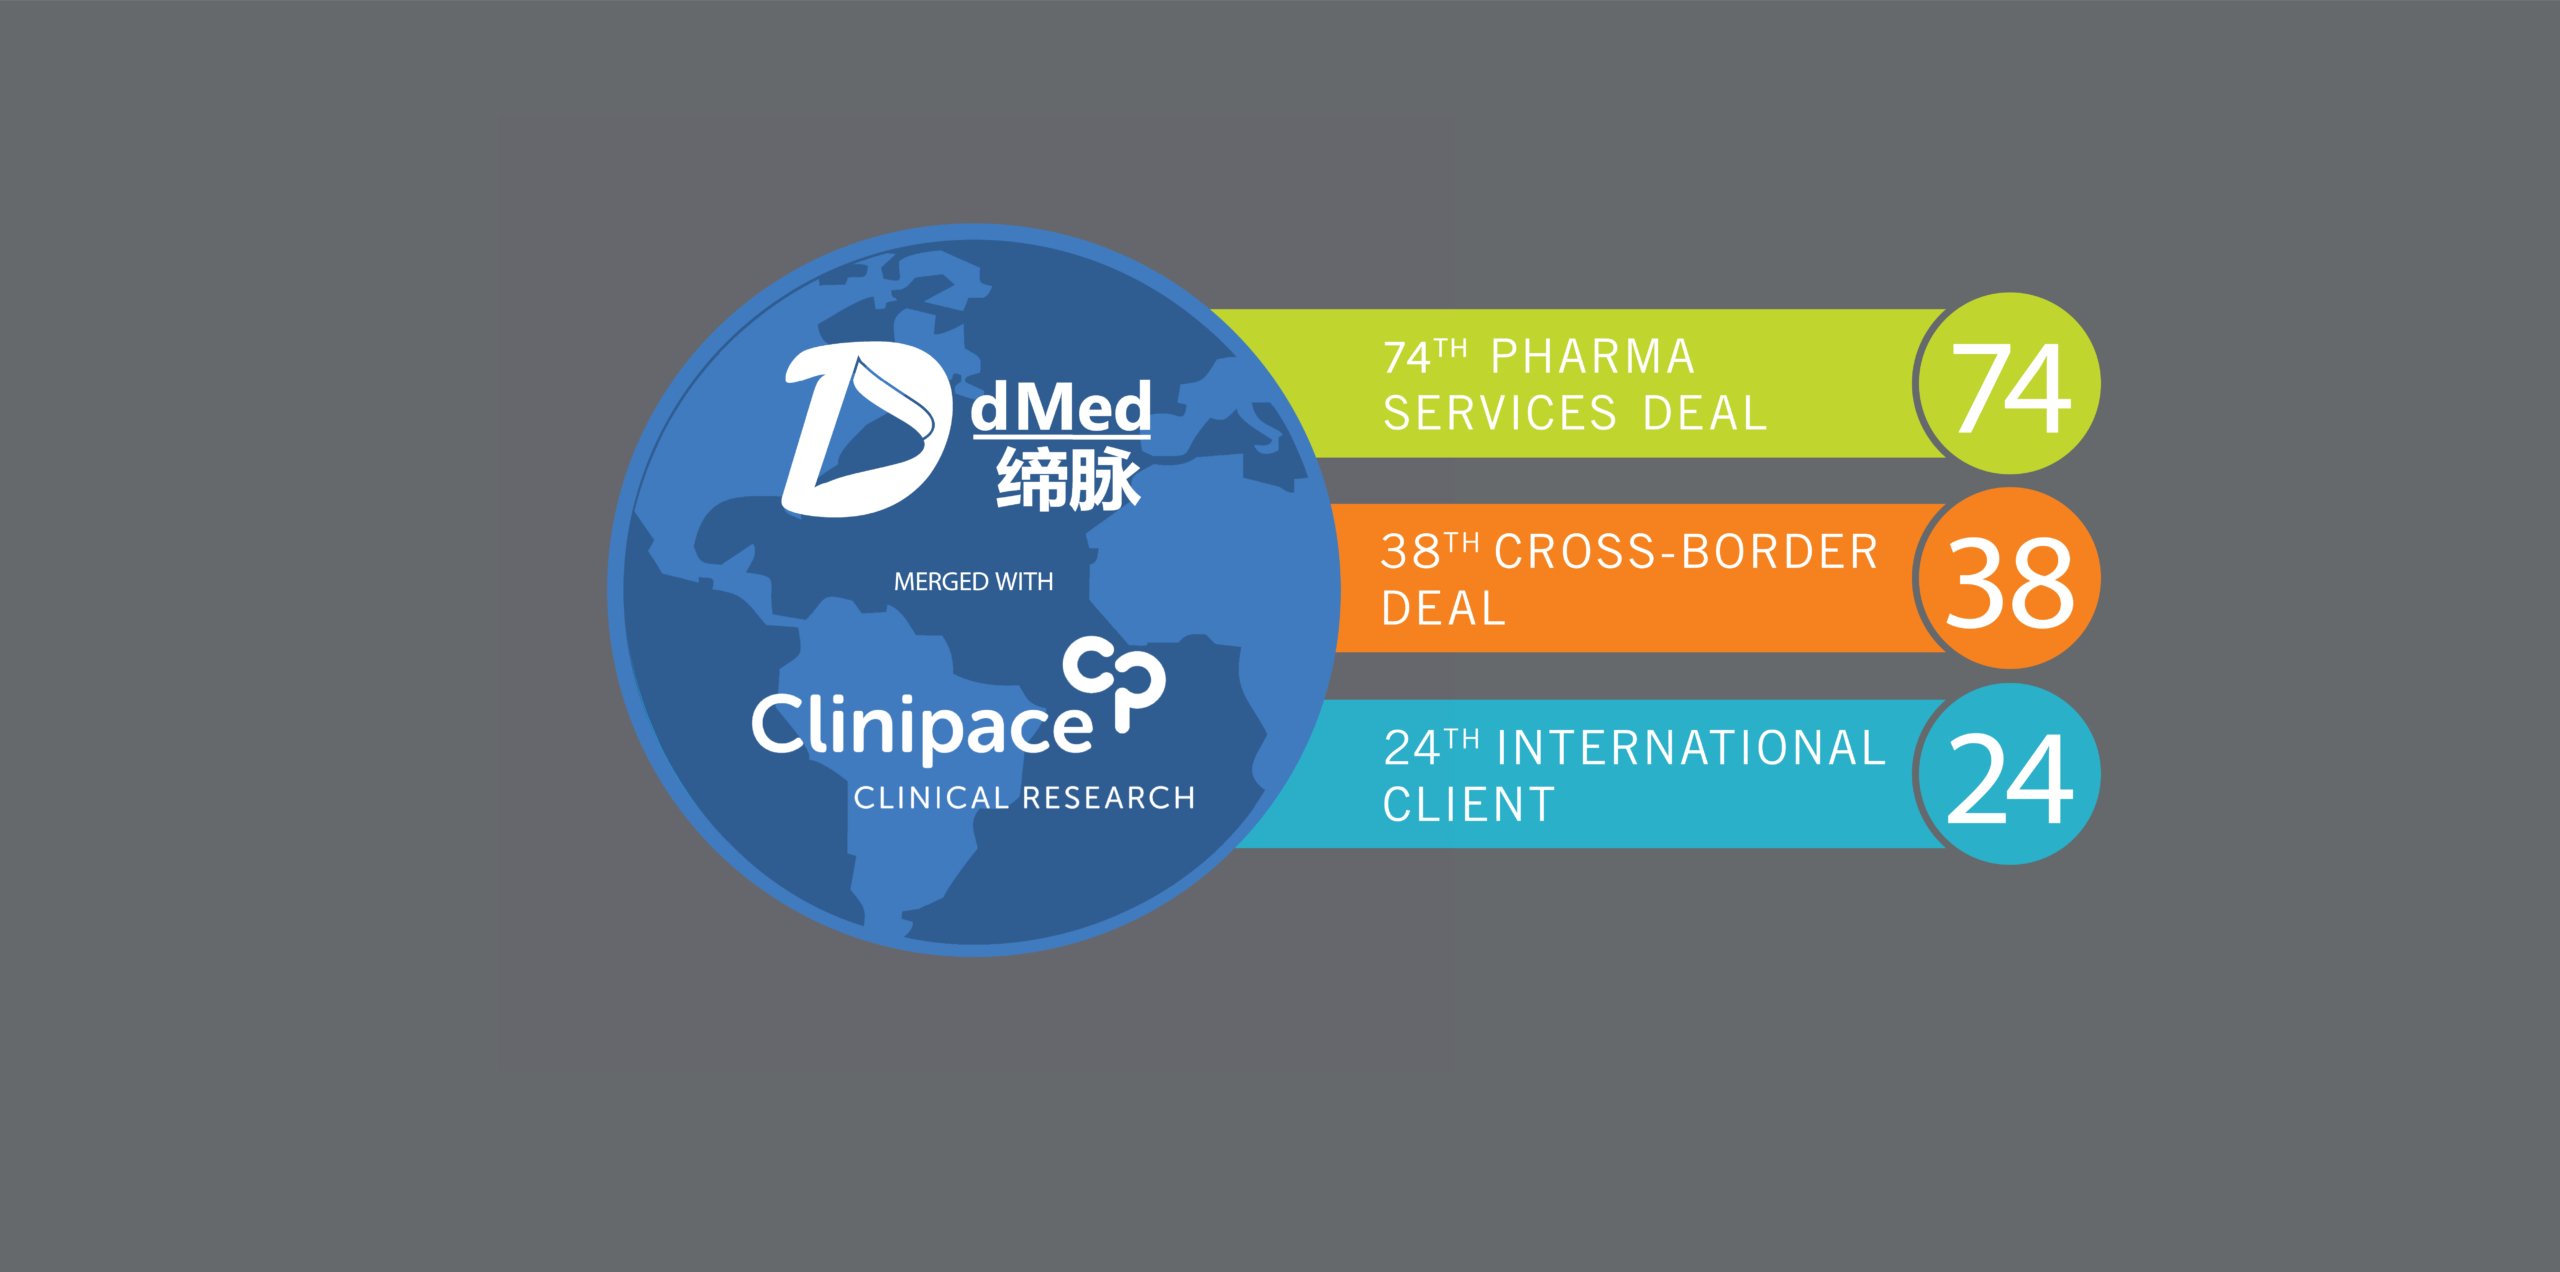 dMed Merged with Clinipace